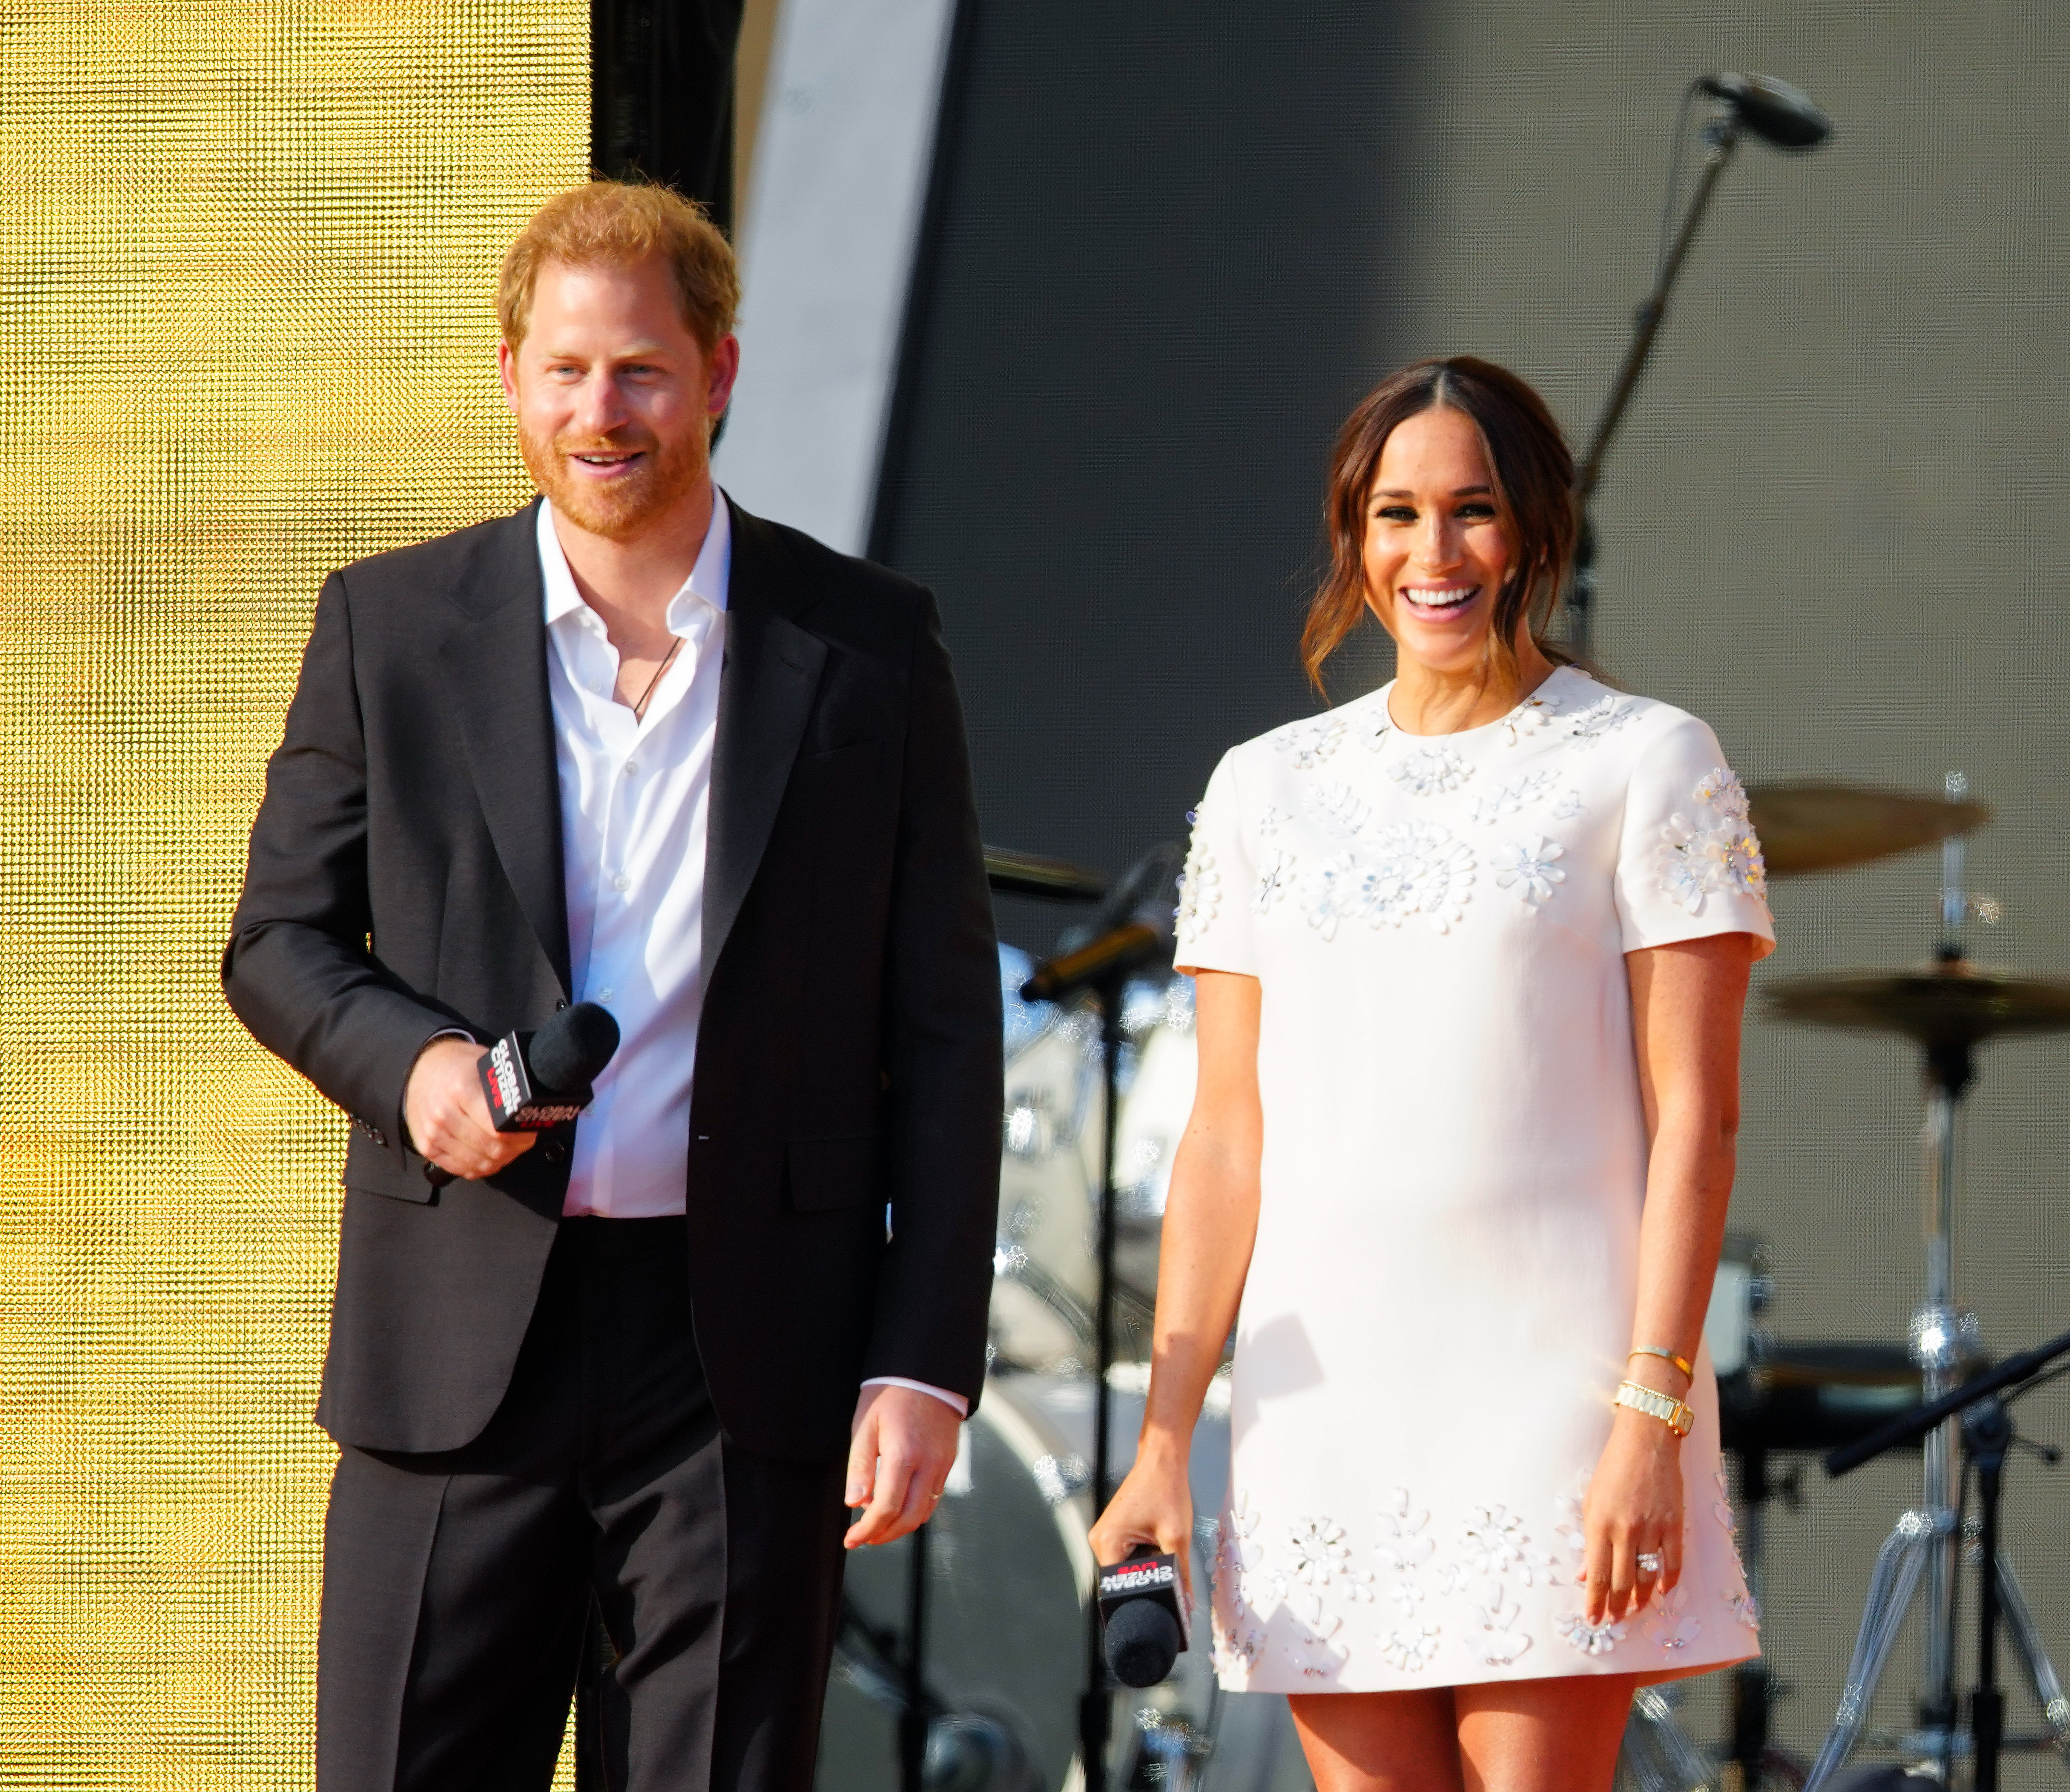 Prince Harry and Meghan Markle speak on stage at Global Citizen Live: New York on September 25, 2021 in New York City. | Source: Getty Images